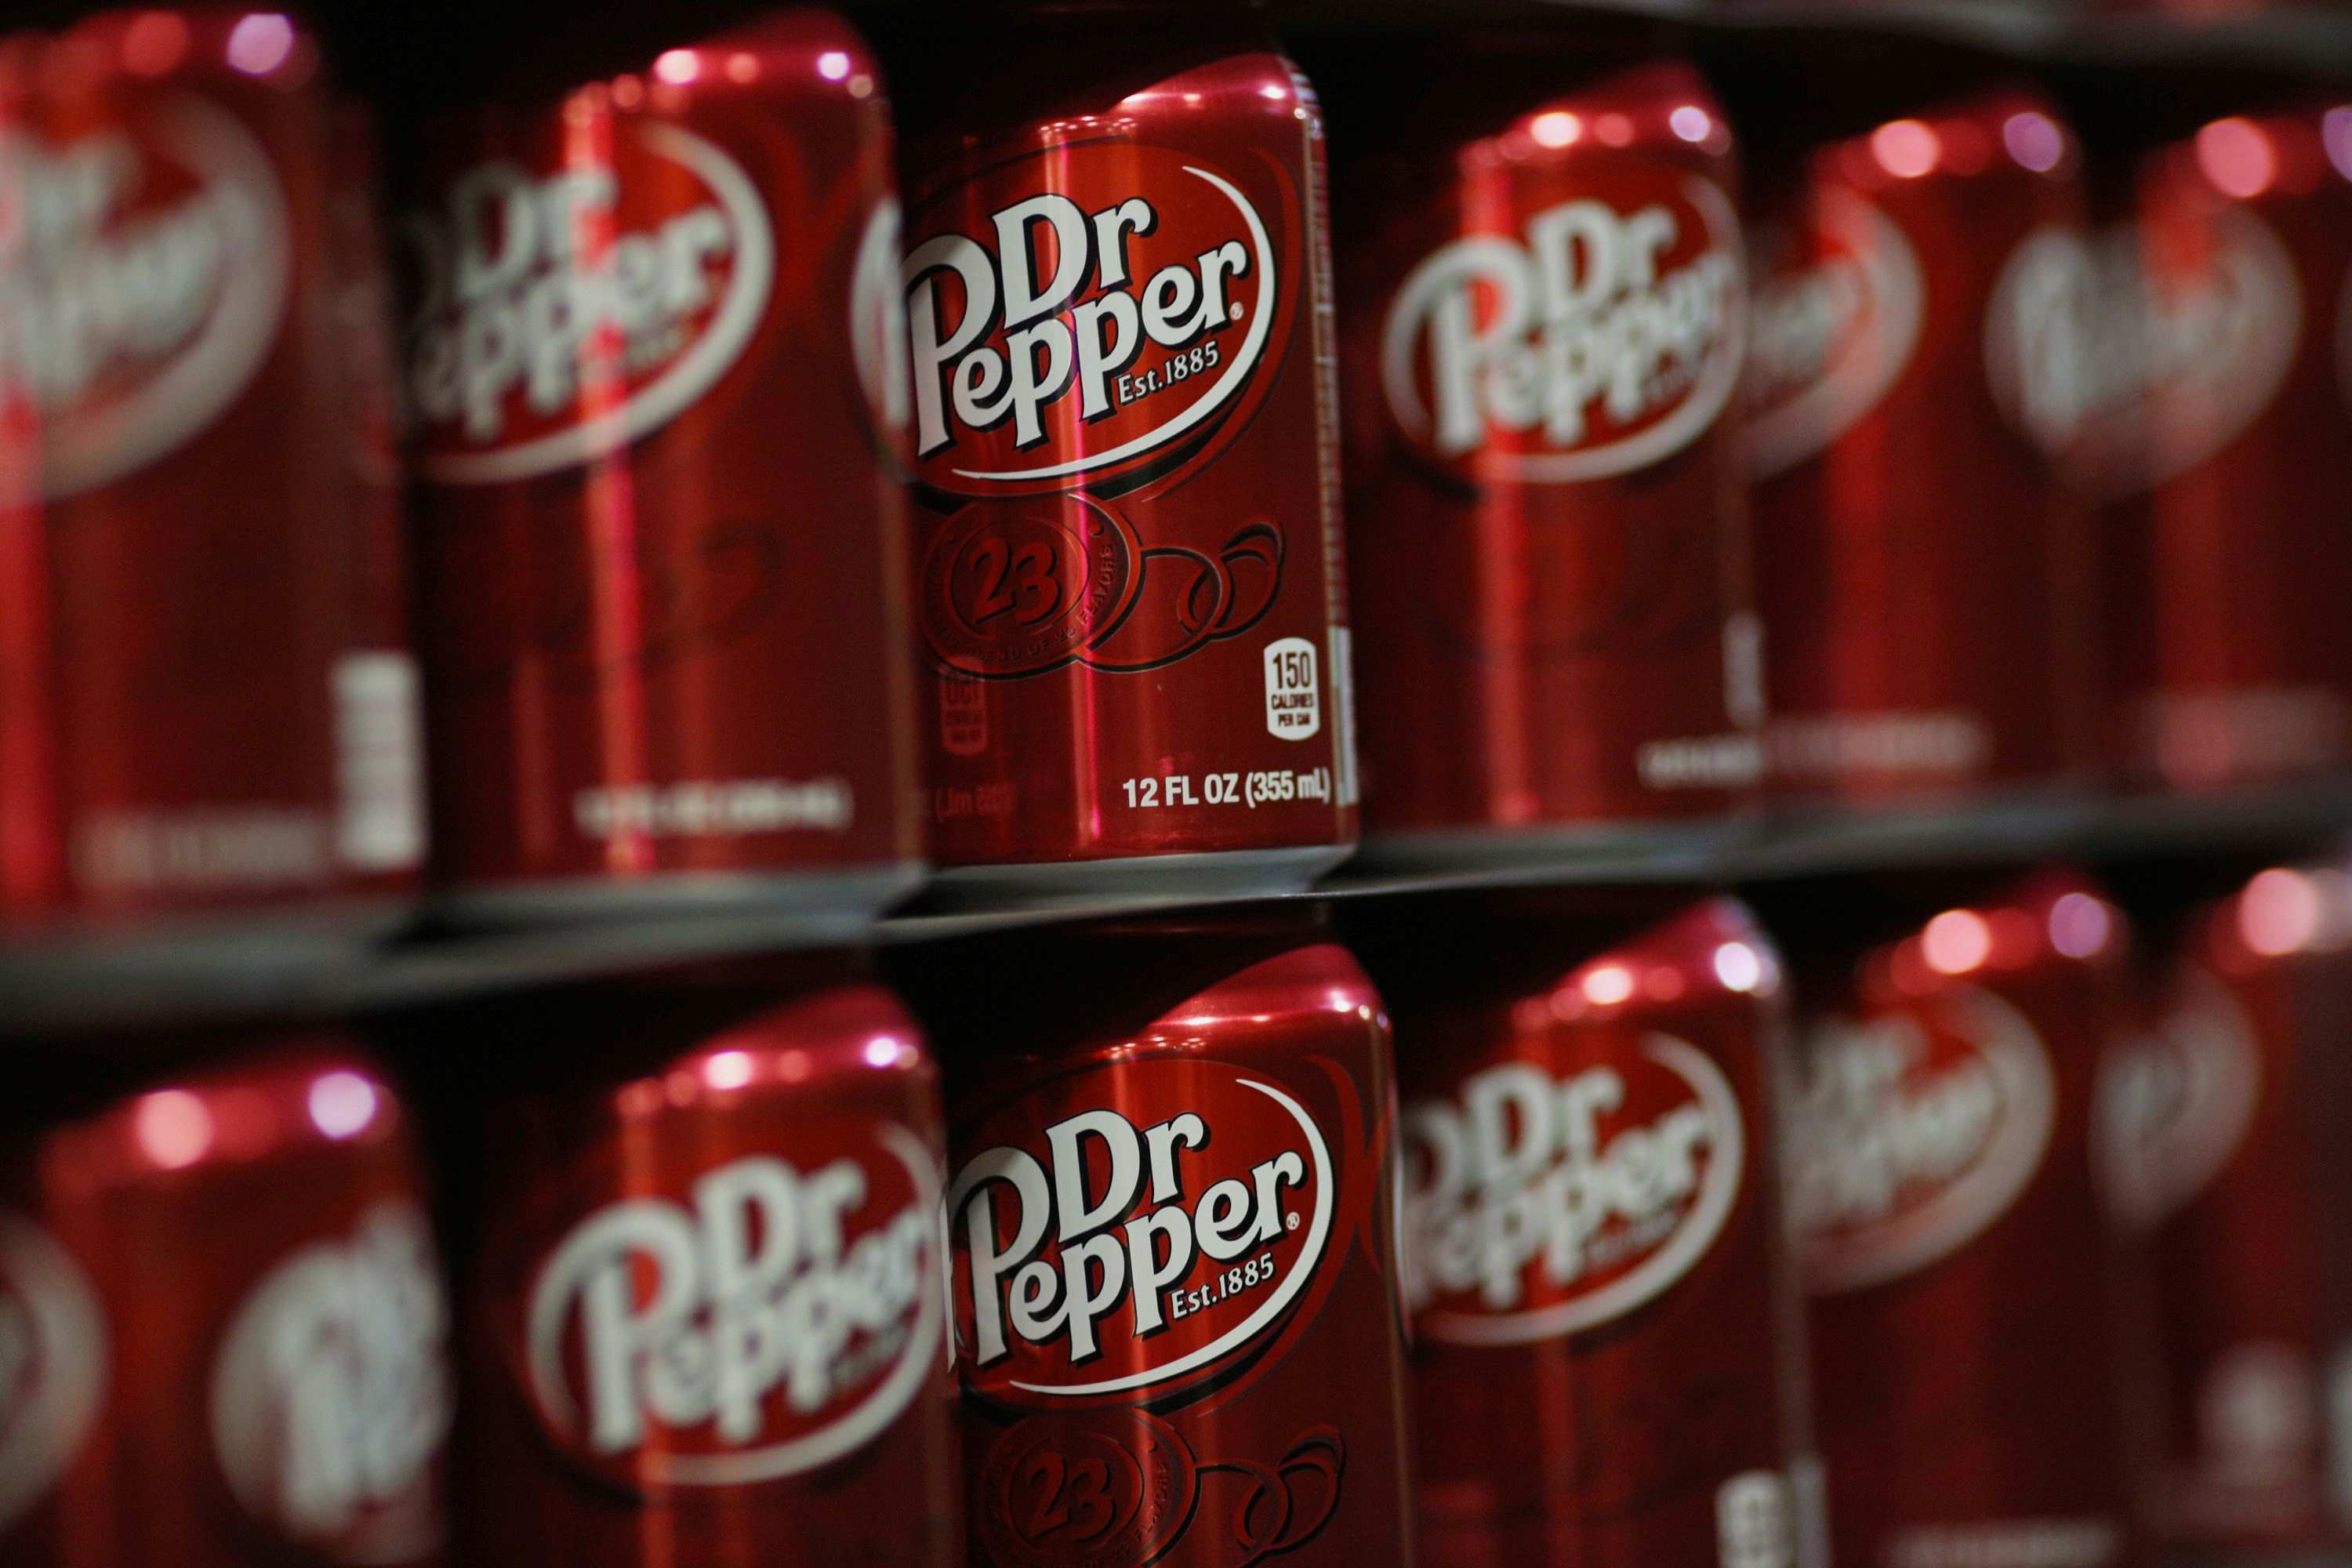 The Shocking Truth: One Can Of Dr Pepper Per Week Vs. One Can Over The Week - Which Is Worse?